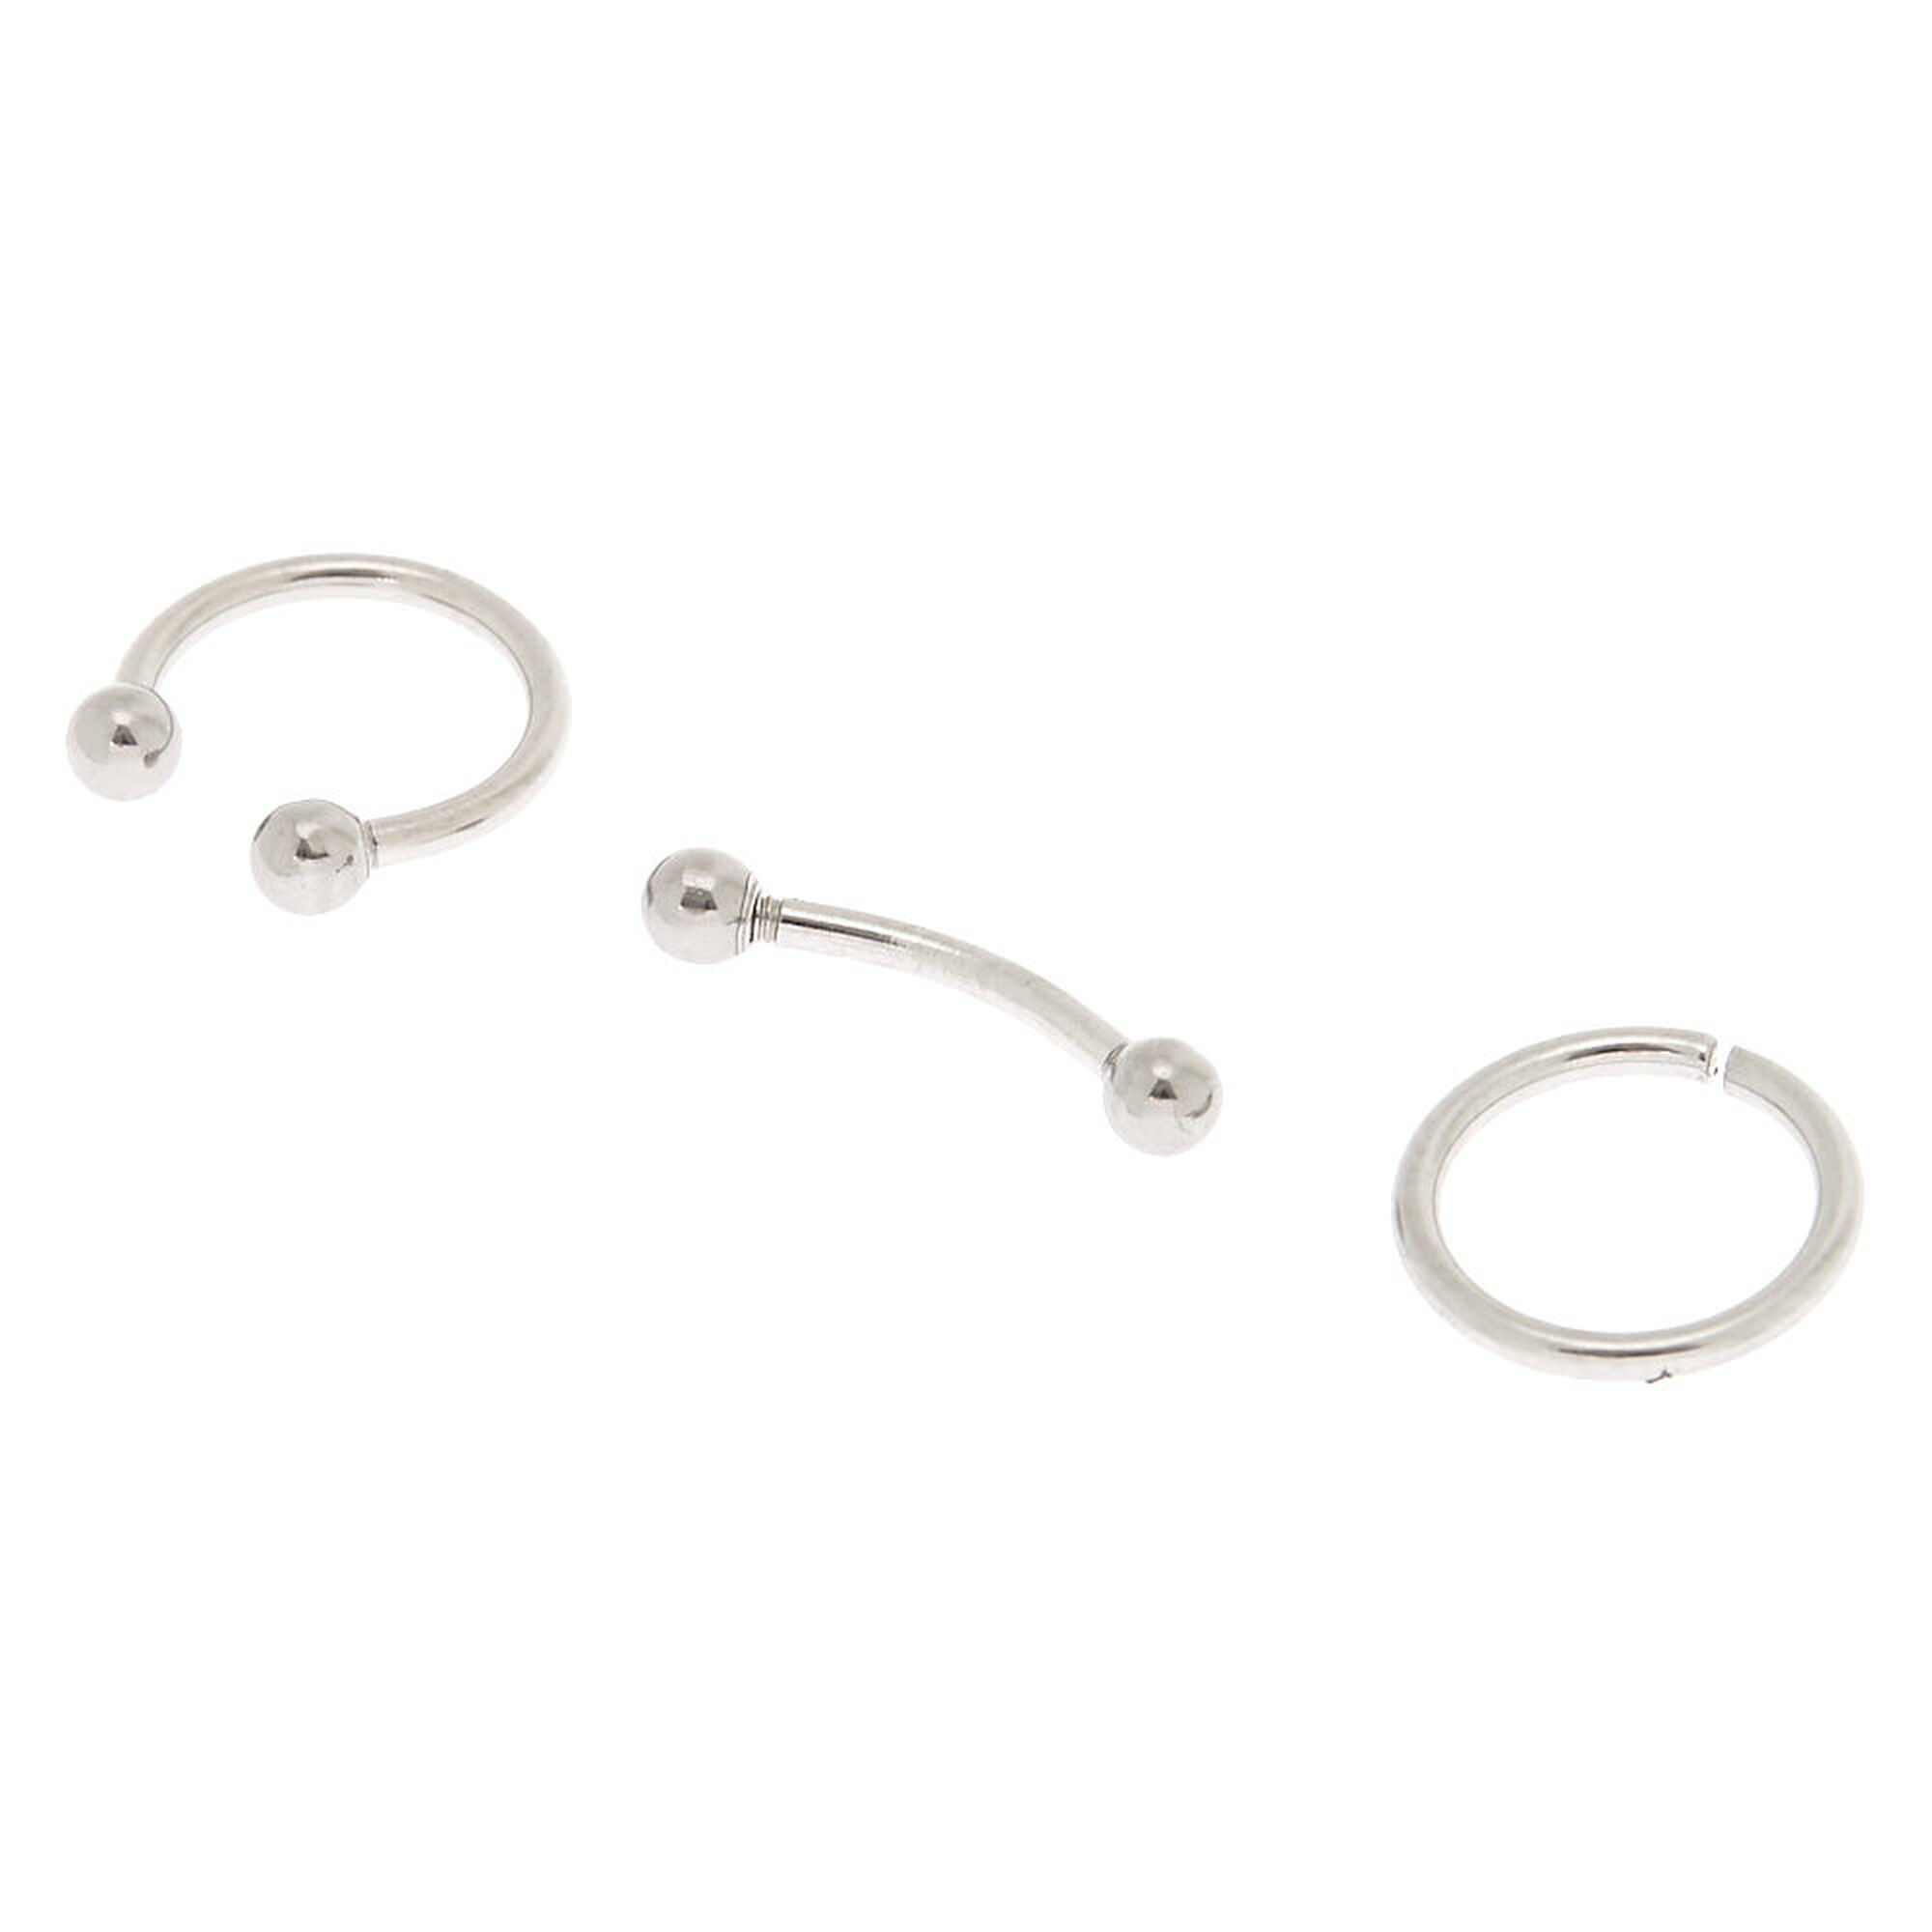 View Claires Tone 16G Rook Earrings 3 Pack Silver information